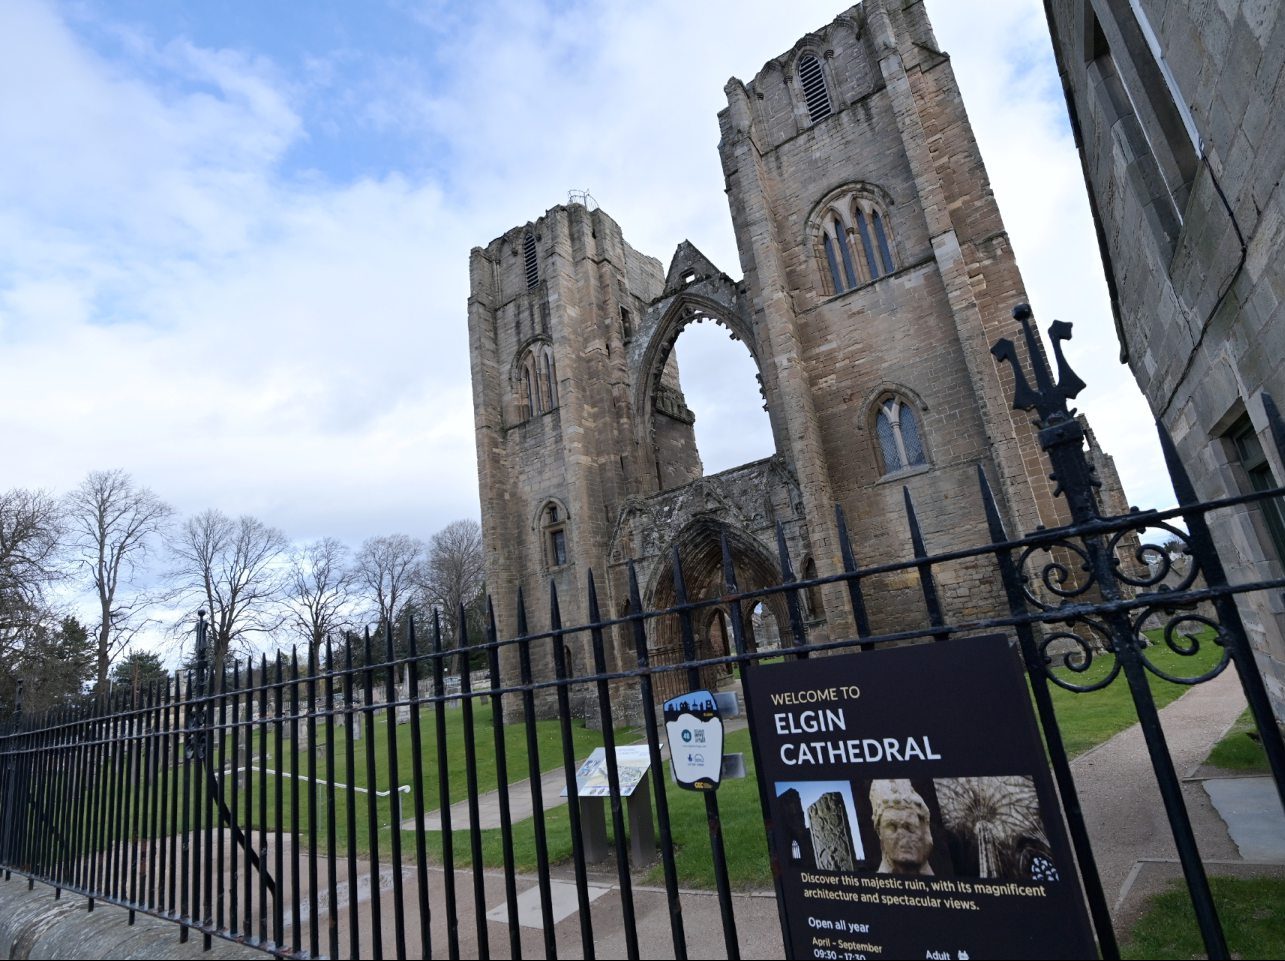 View of Elgin Cathedral from gates.